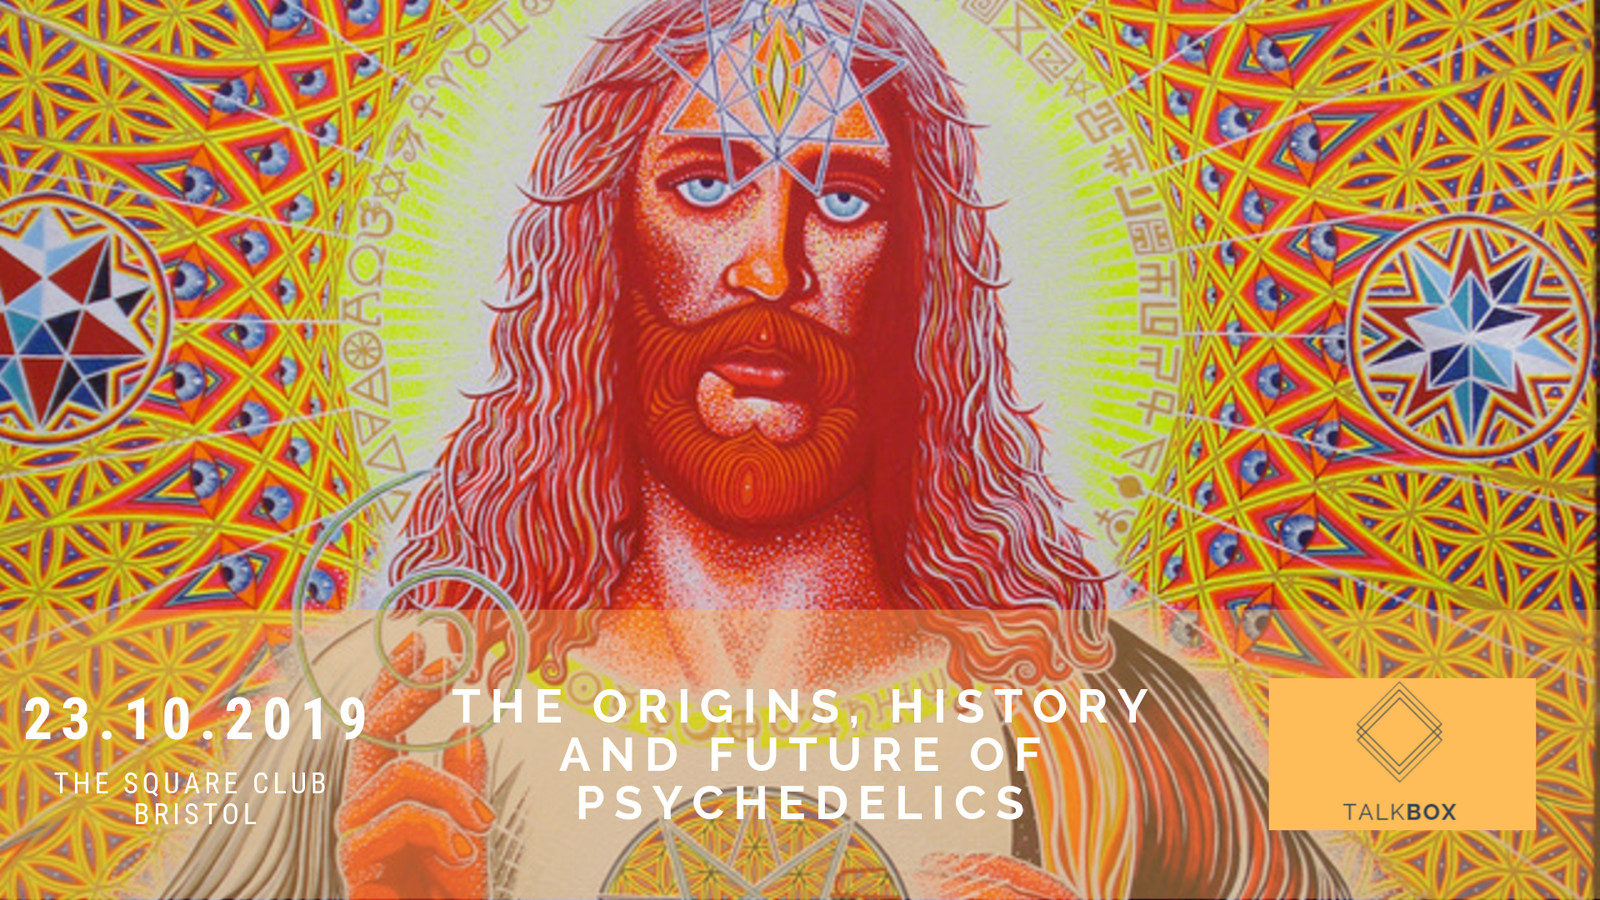 The Origins, History and Future of Psychedelics at The Square Club